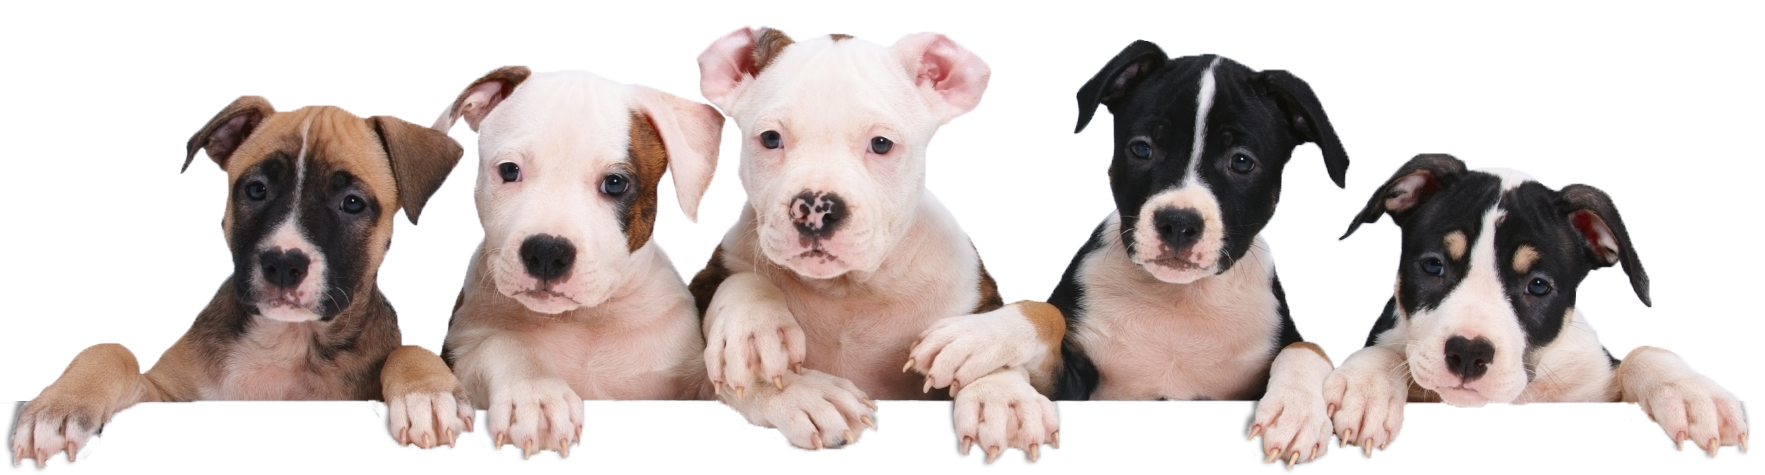 Puppies PNG Image with Transparent Background